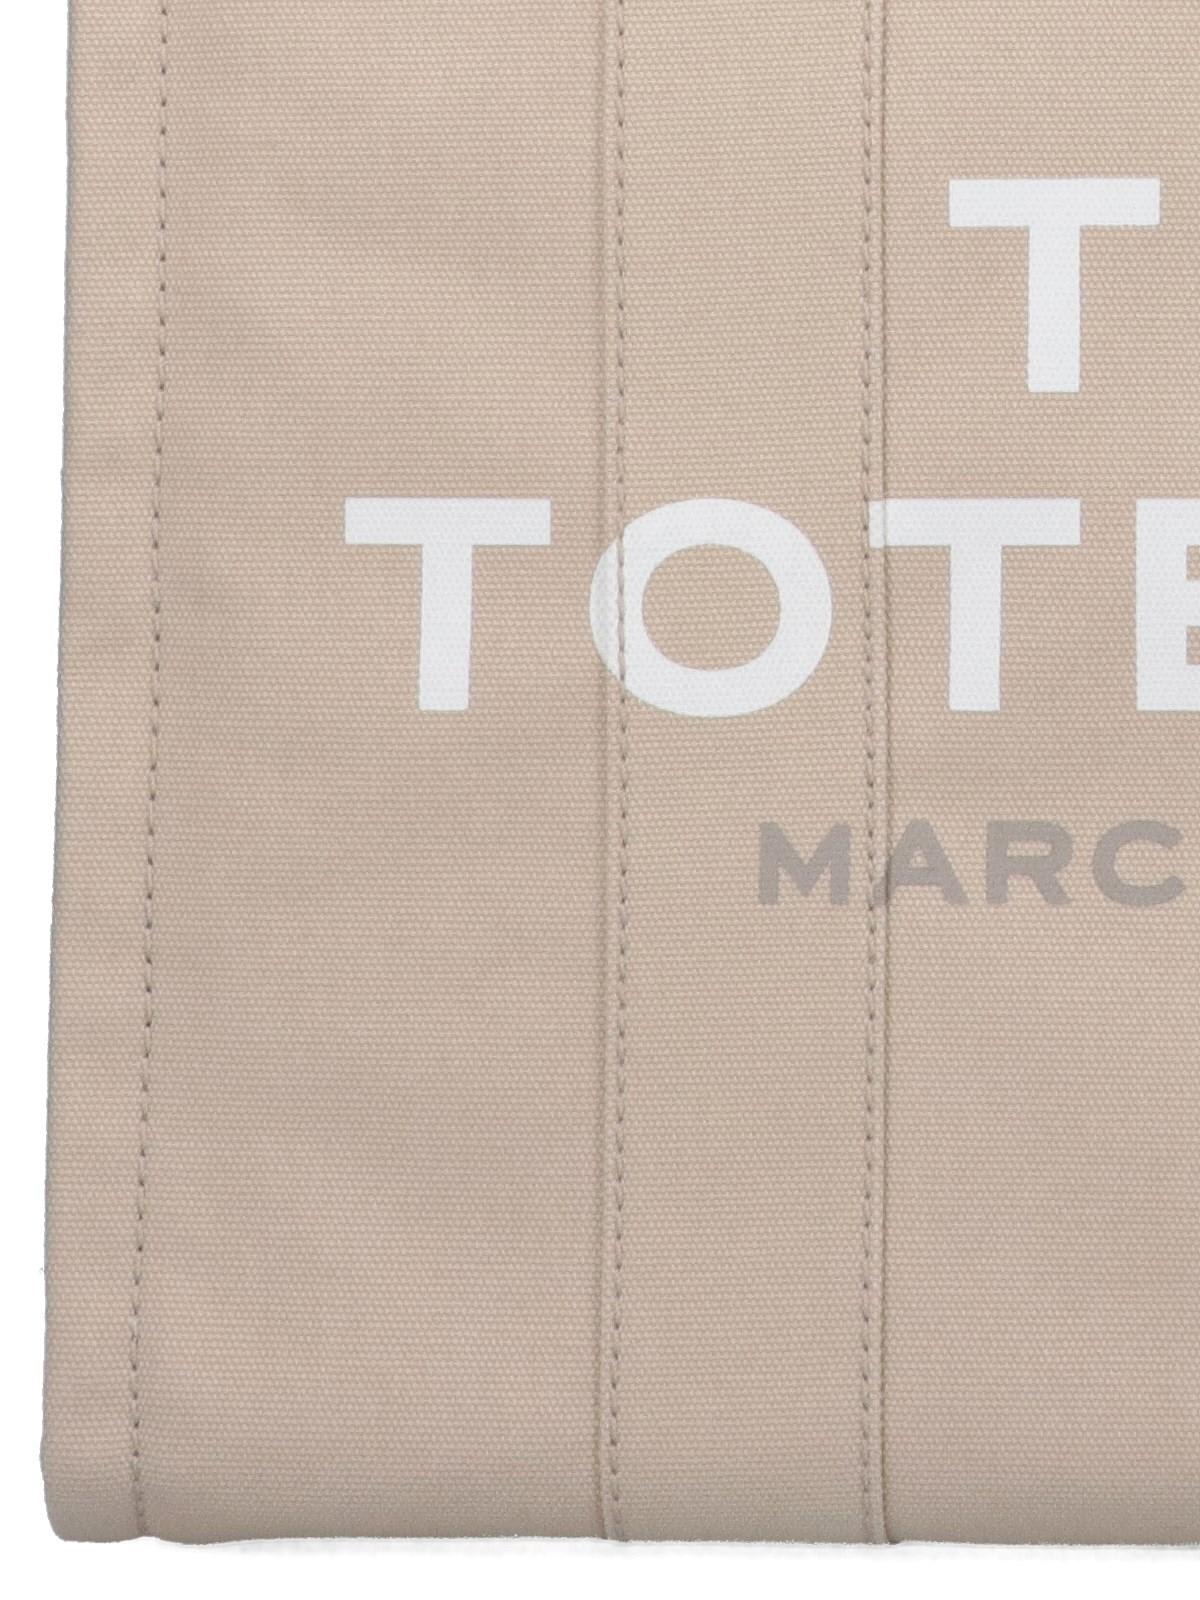 Shop Marc Jacobs The Large Tote Bag In Neutrals